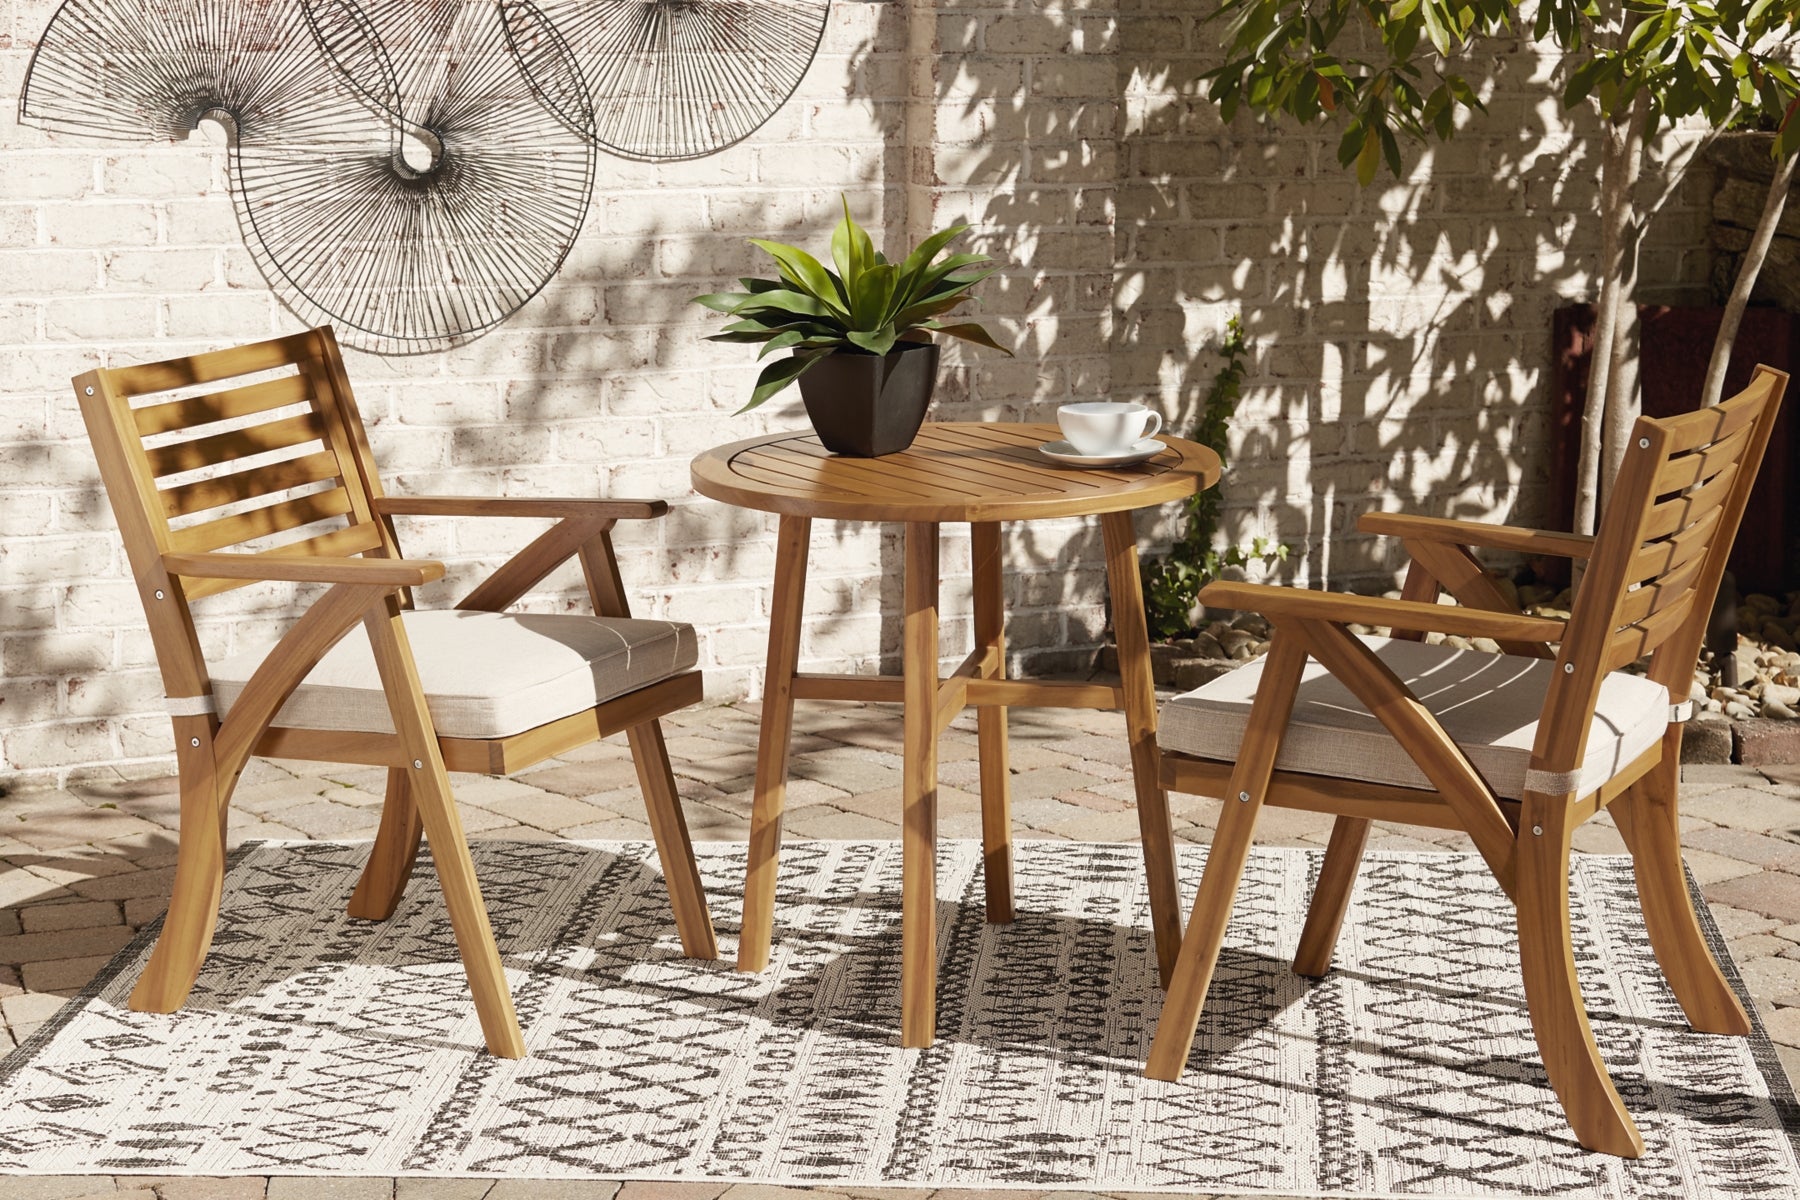 Vallerie Outdoor Chairs with Table Set (Set of 3)